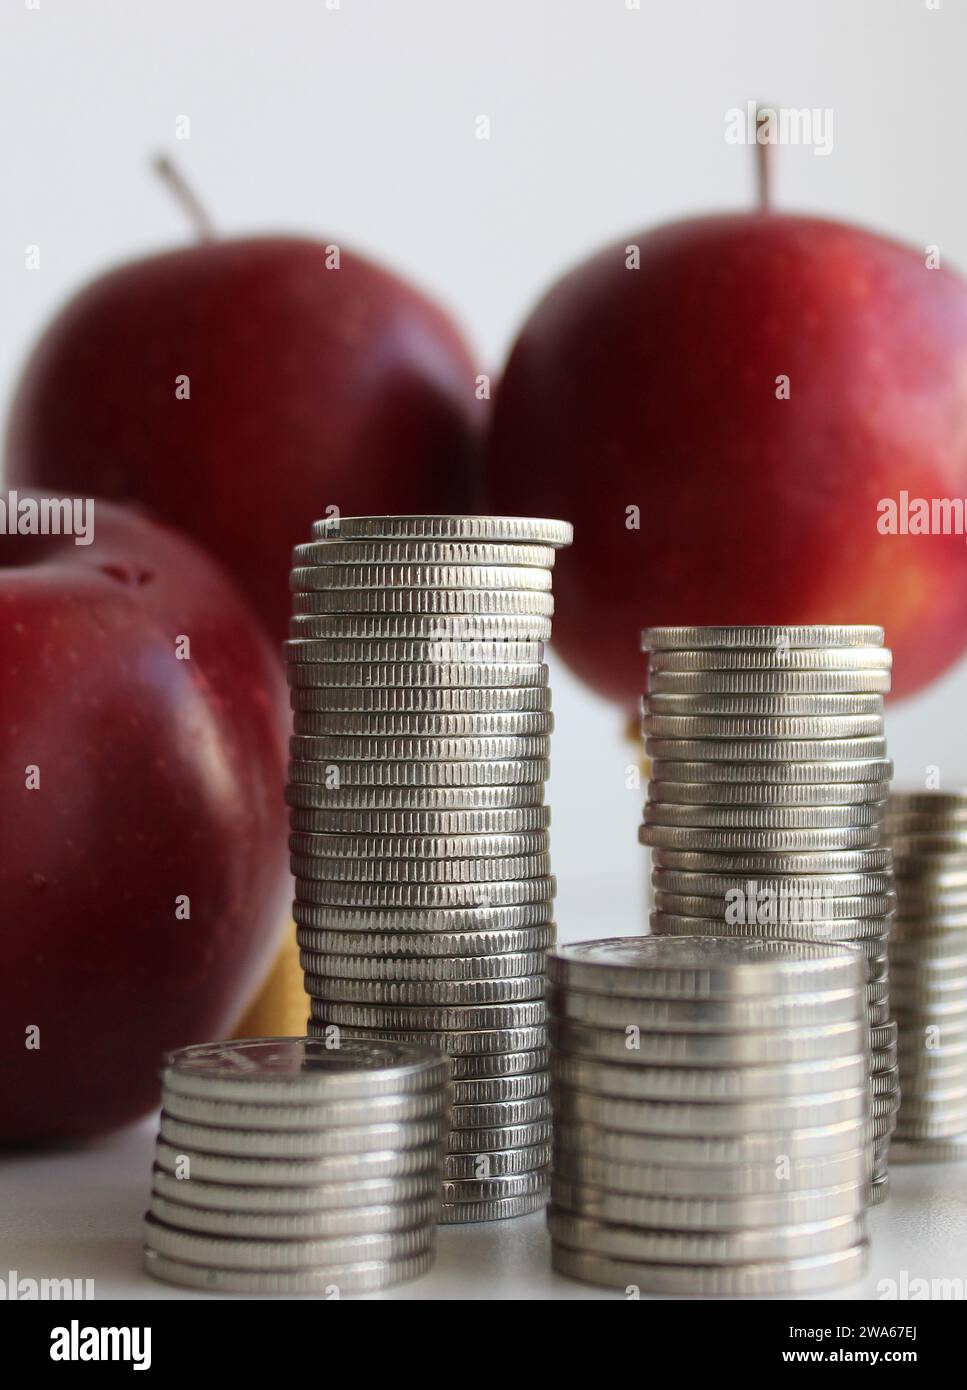 Concept photo of fruits cost. Three red apples and columns of coins closeup stock photo Stock Photo